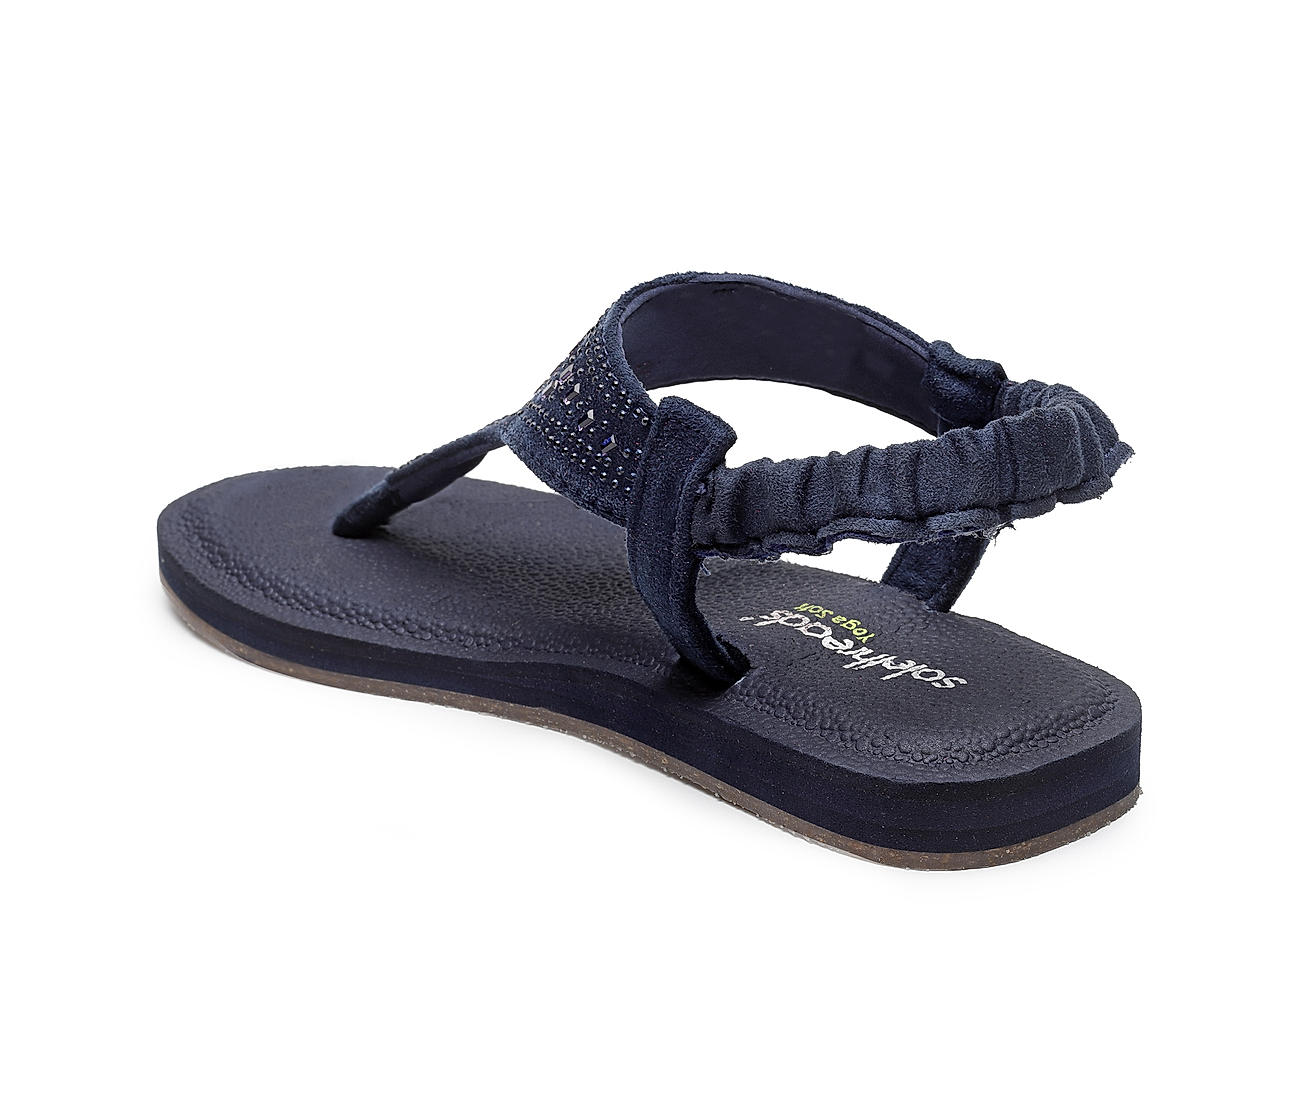 Buy Sole Threads Women's Navy Yoga Sandals Online at Regal Shoes